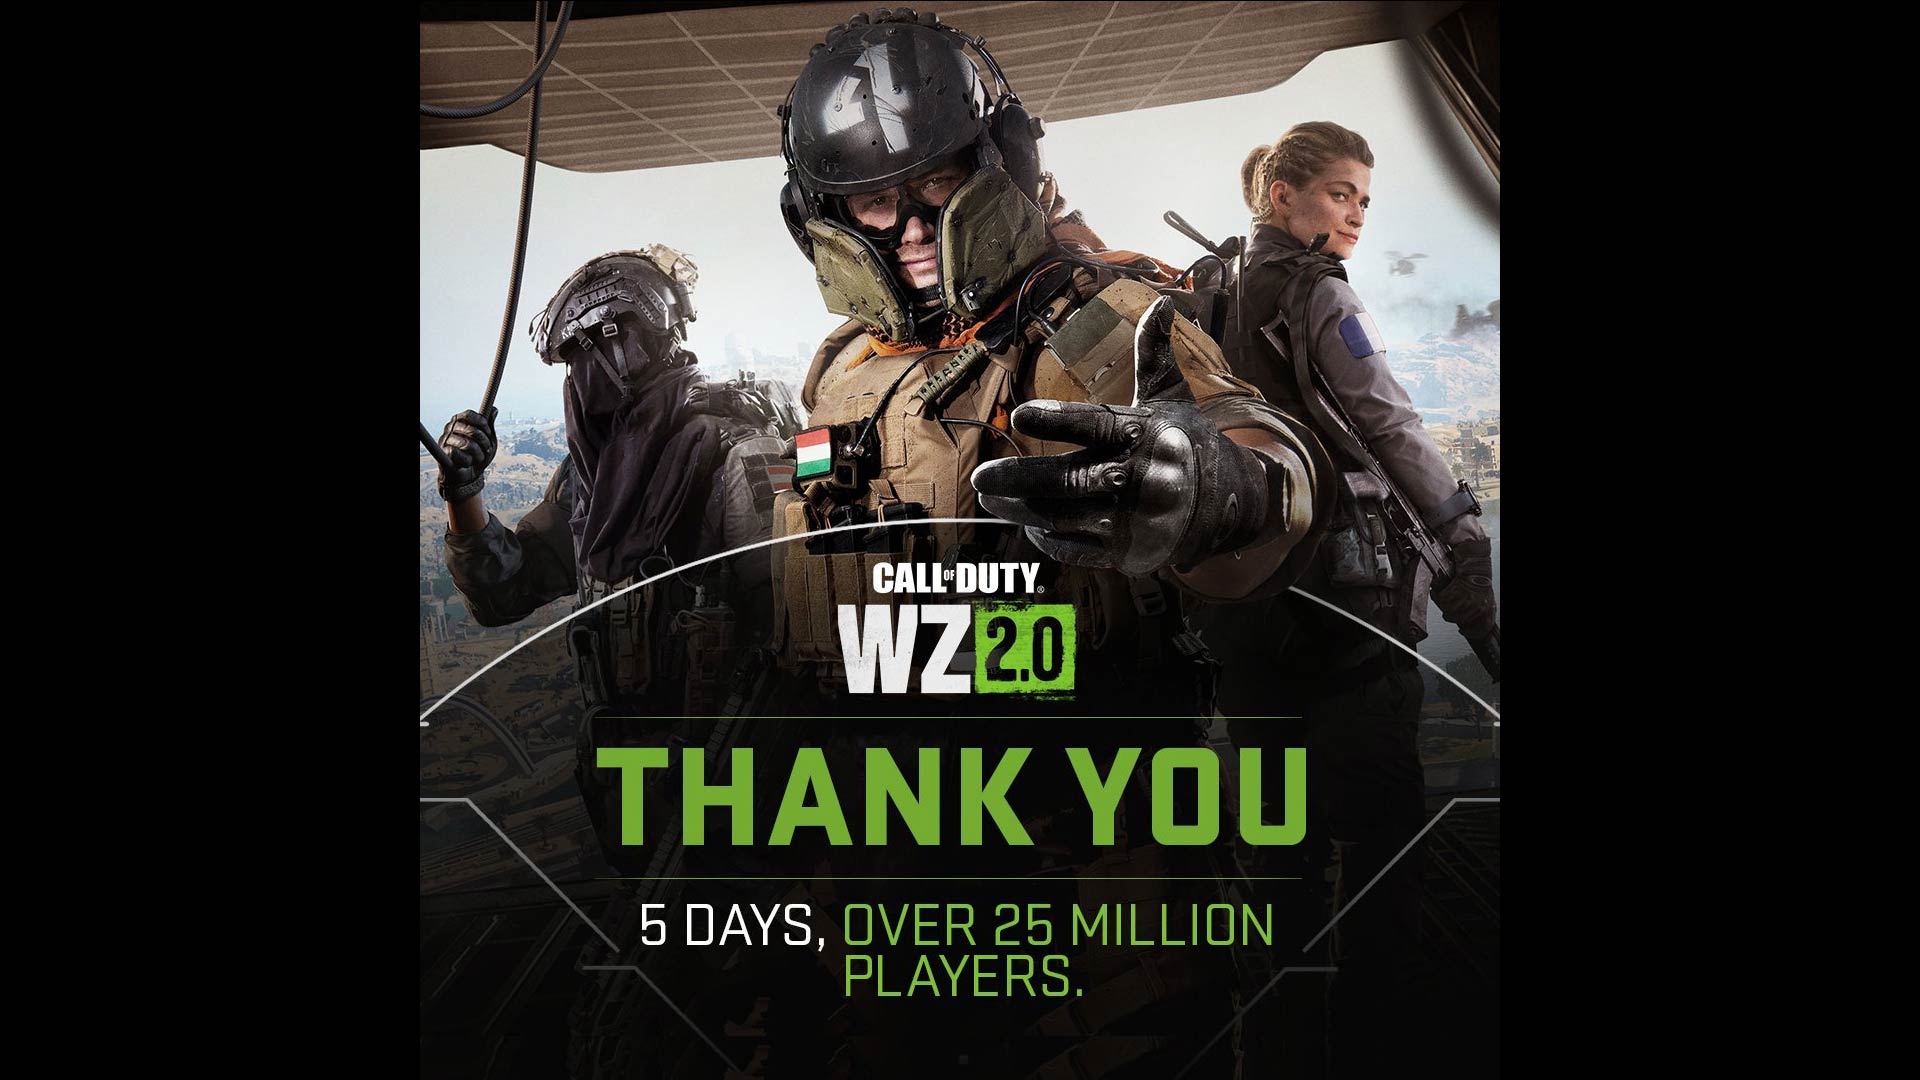 Call of Duty: Warzone 2.0 downloads top 25 million